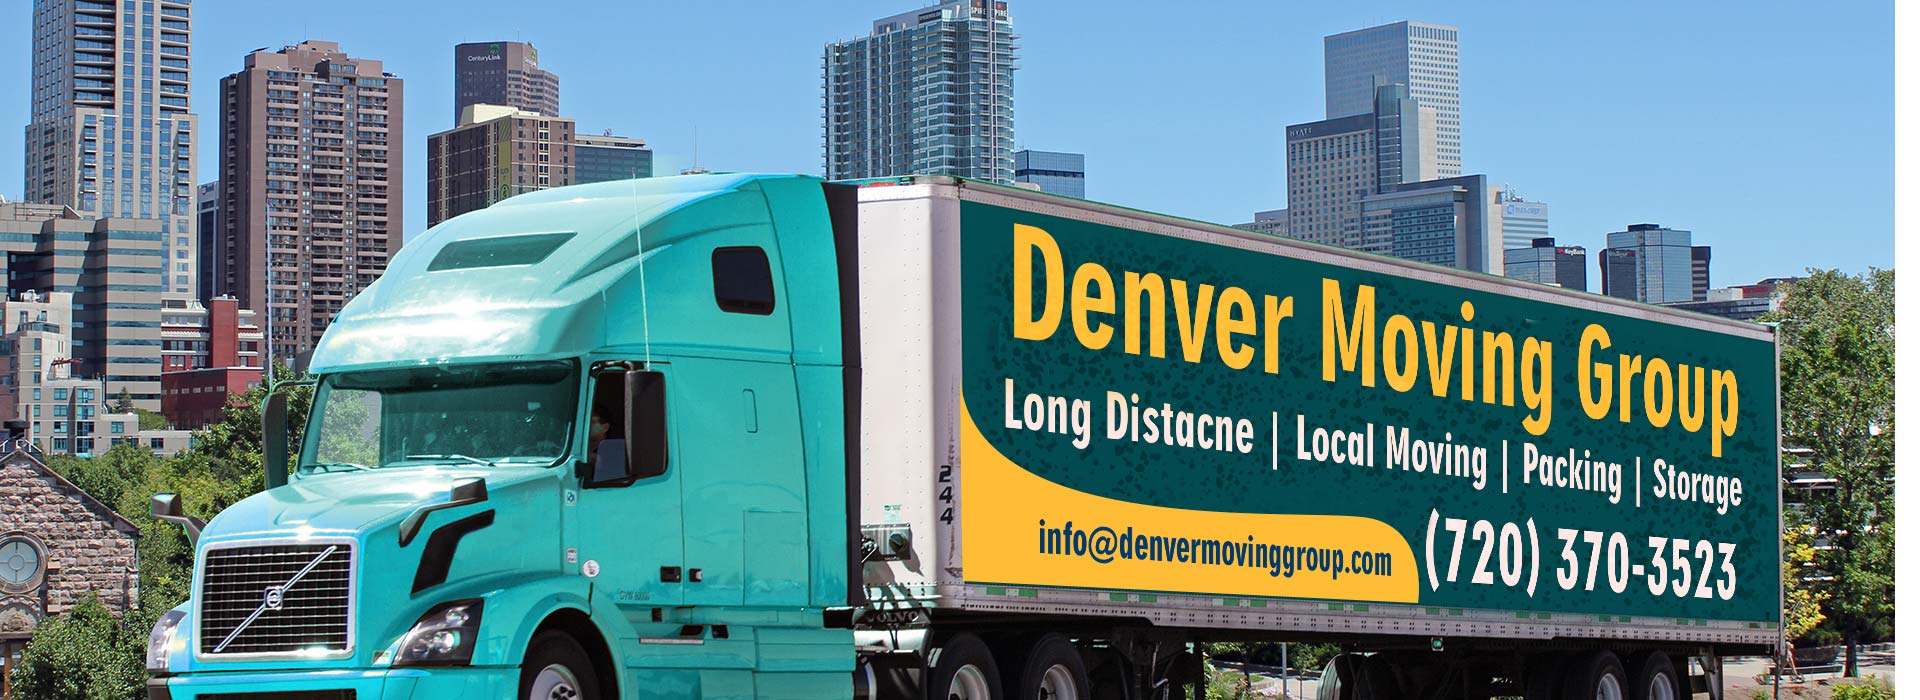 long distance and local moving company denver